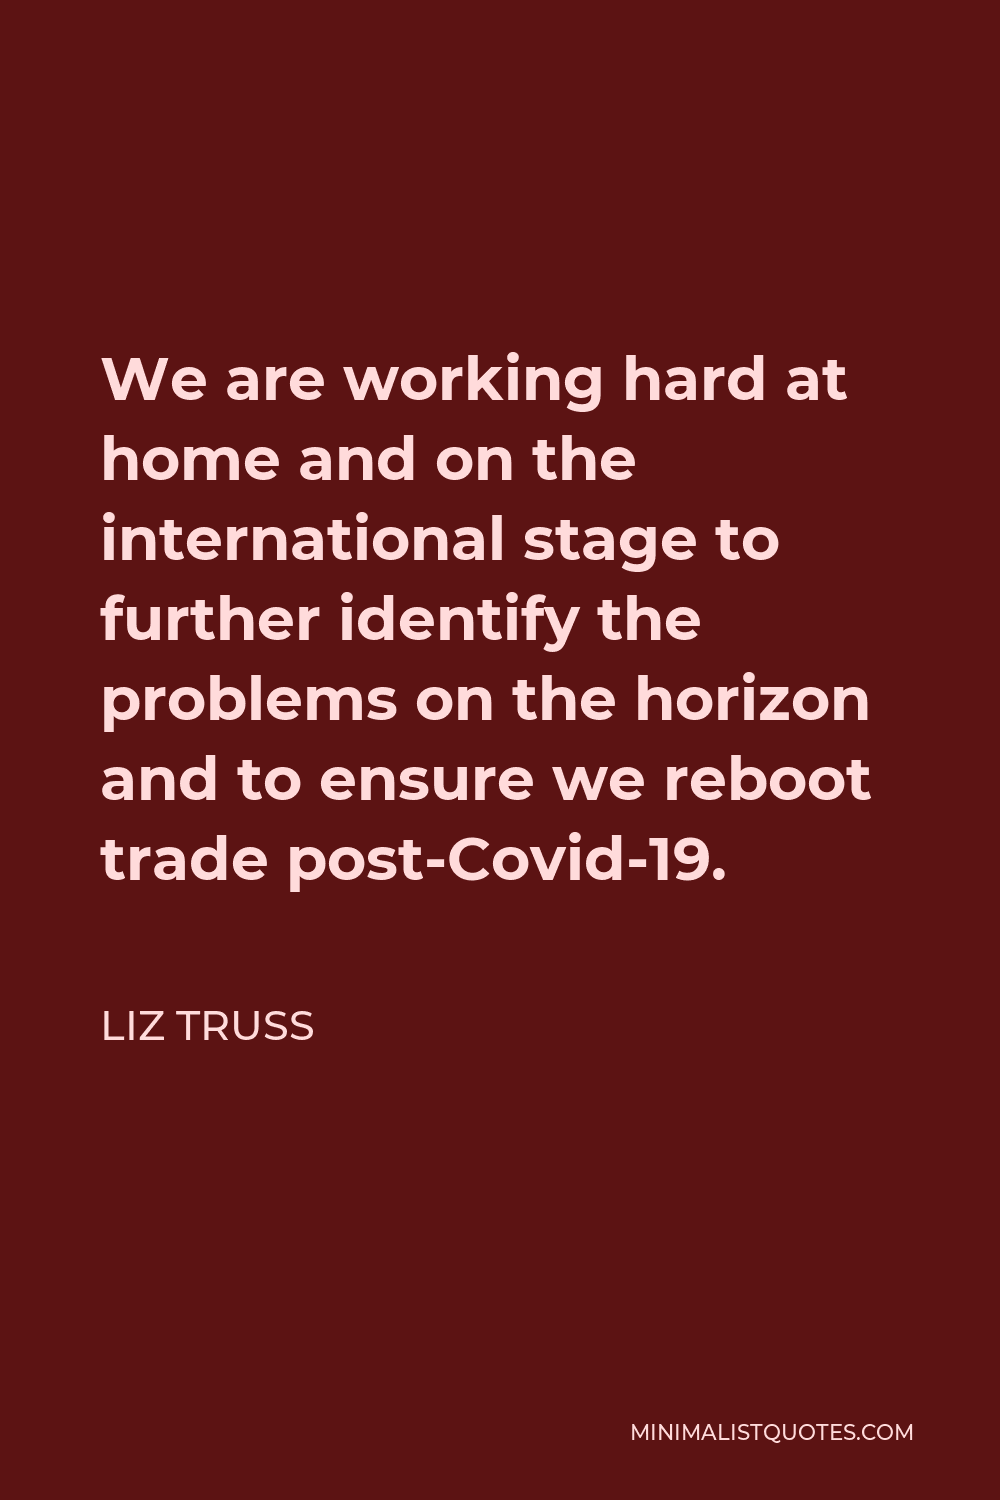 Liz Truss Quote - We are working hard at home and on the international stage to further identify the problems on the horizon and to ensure we reboot trade post-Covid-19.